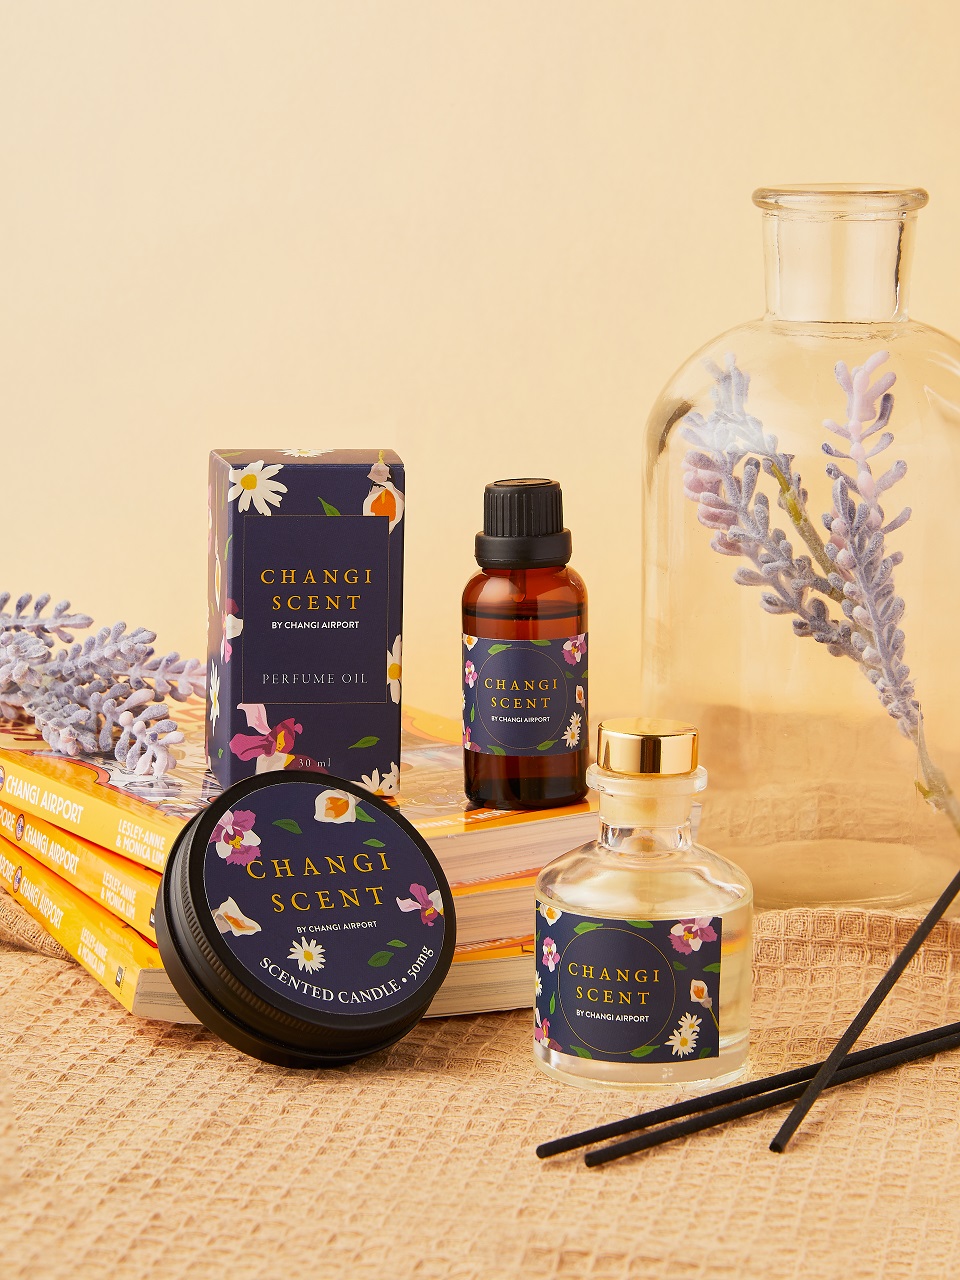 The Changi Scent collection available at GIFT by Changi Airport